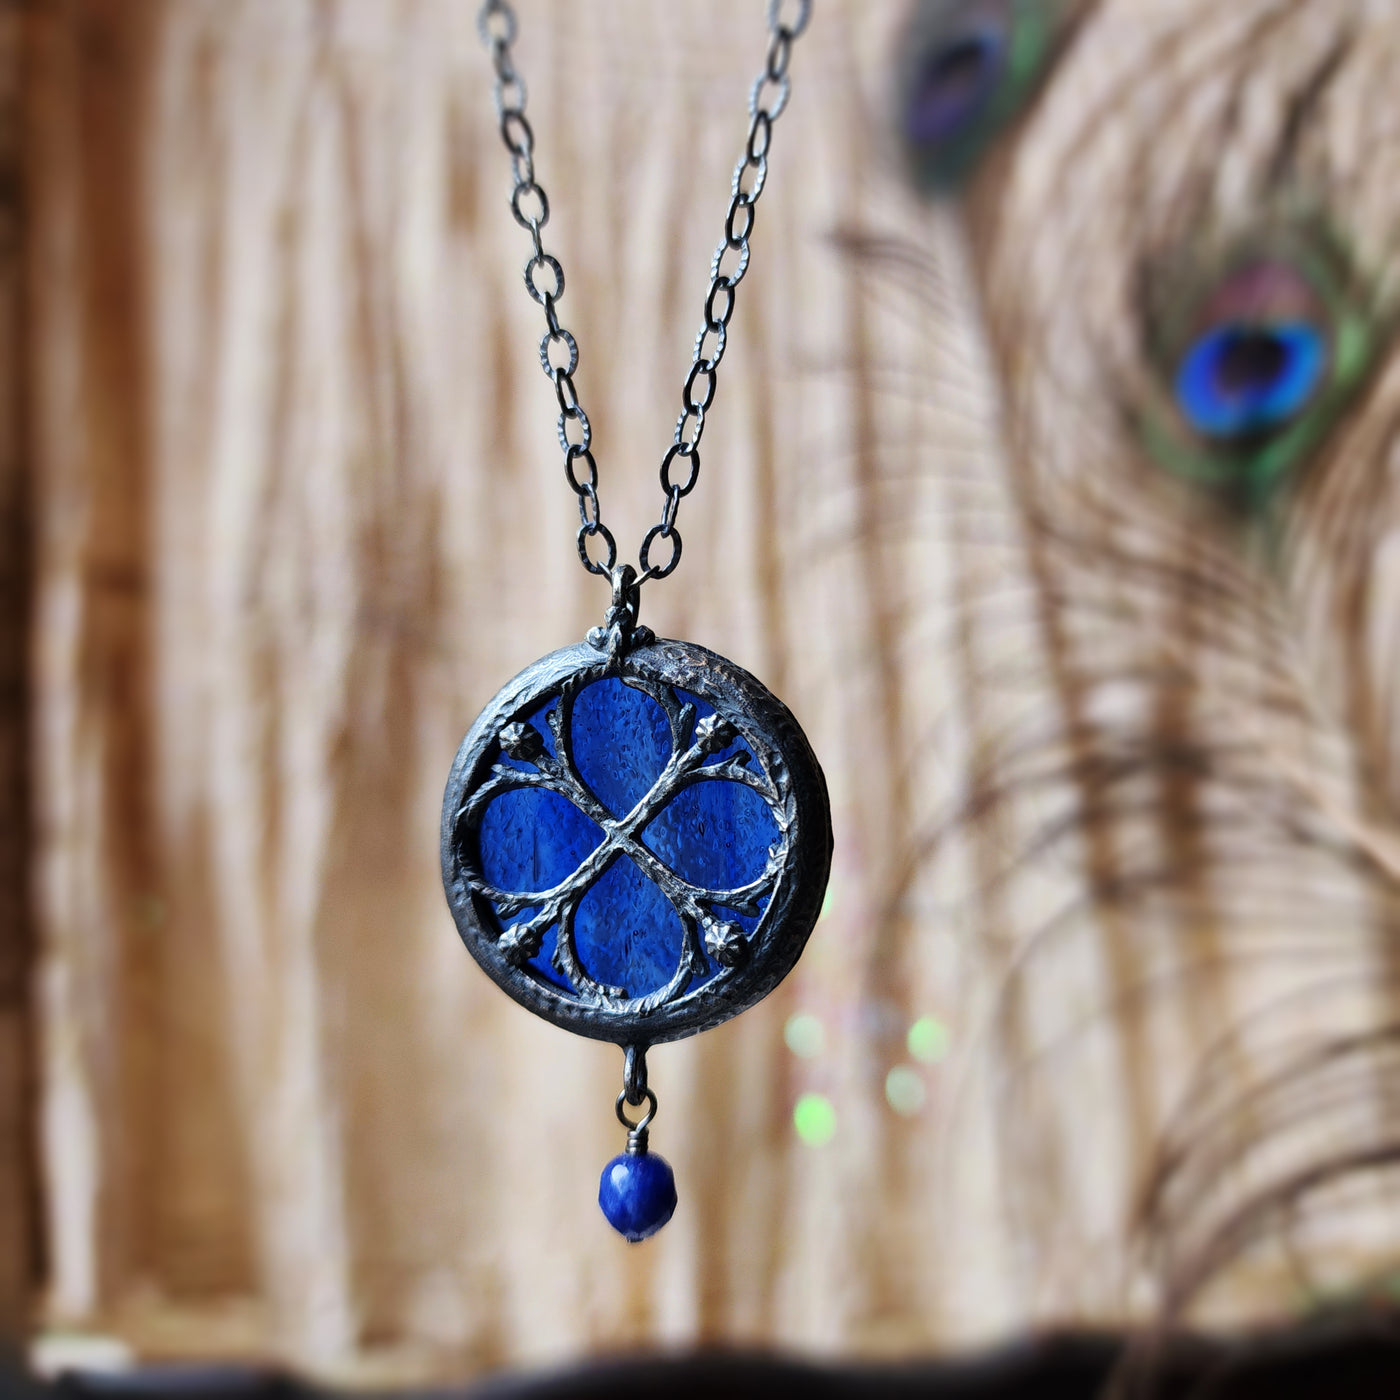 morpheus - floriated clover miracle window amulet